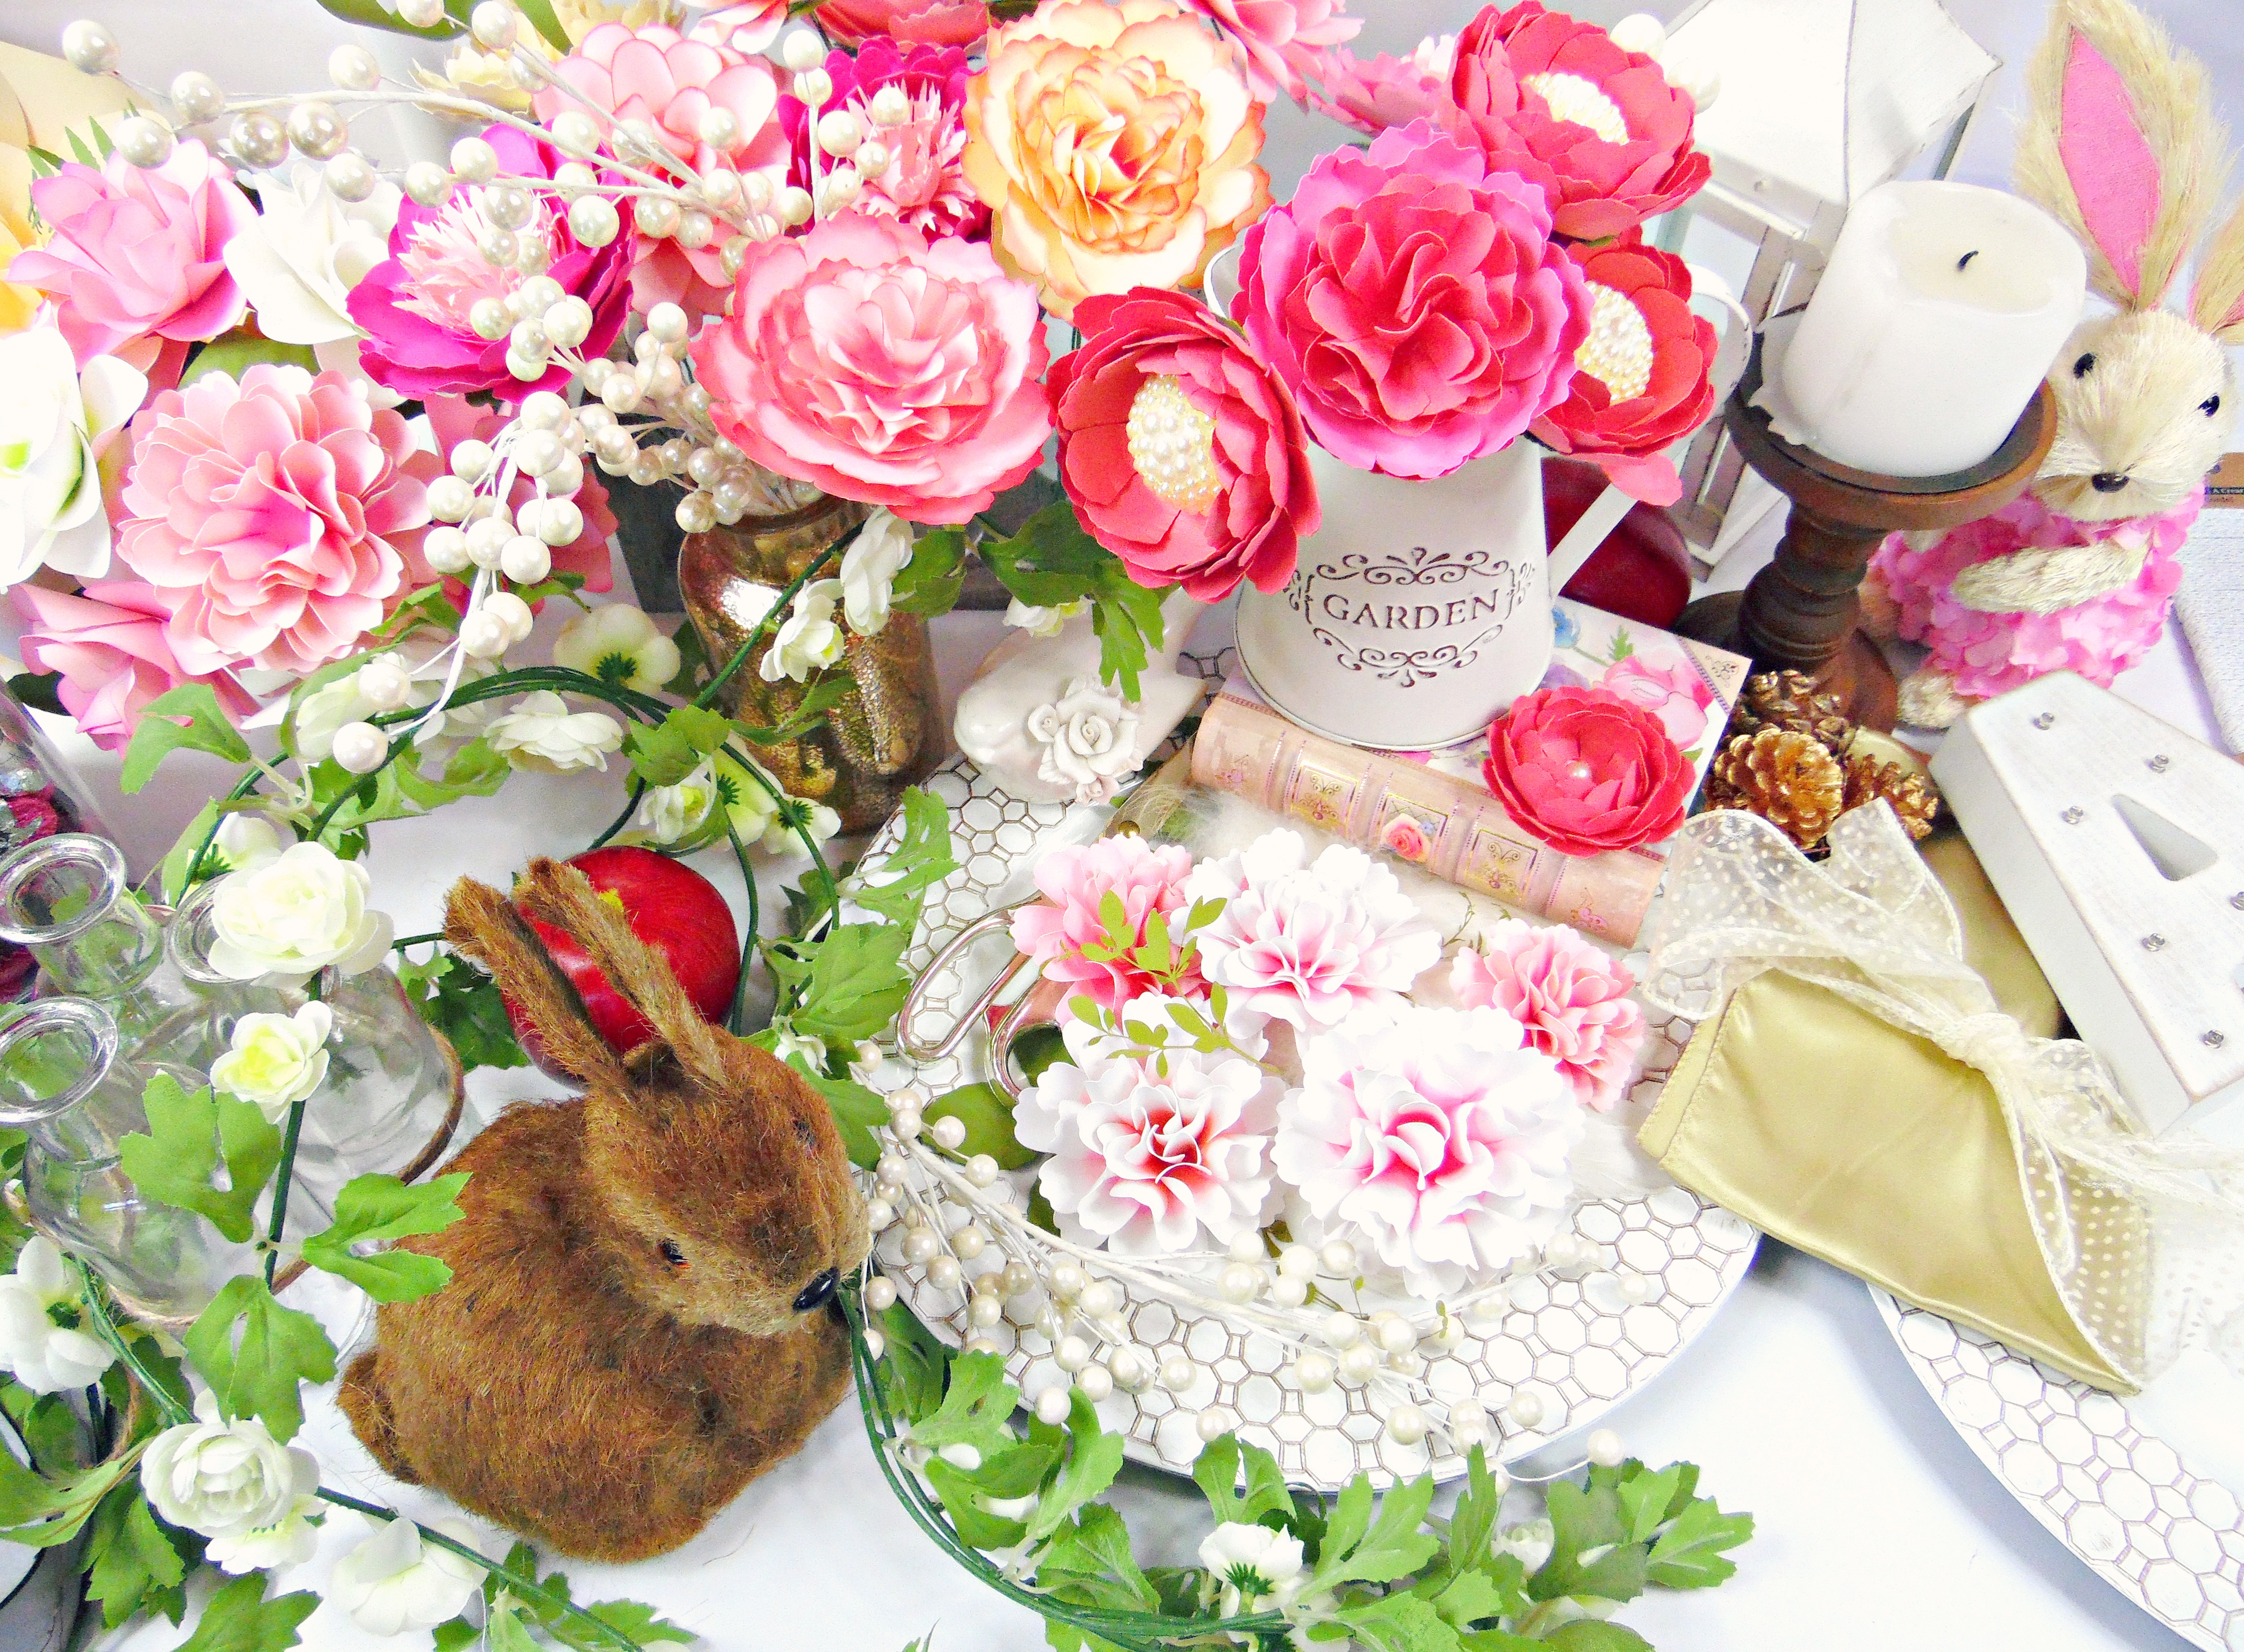 Warm up to Spring with these tablescape ideas